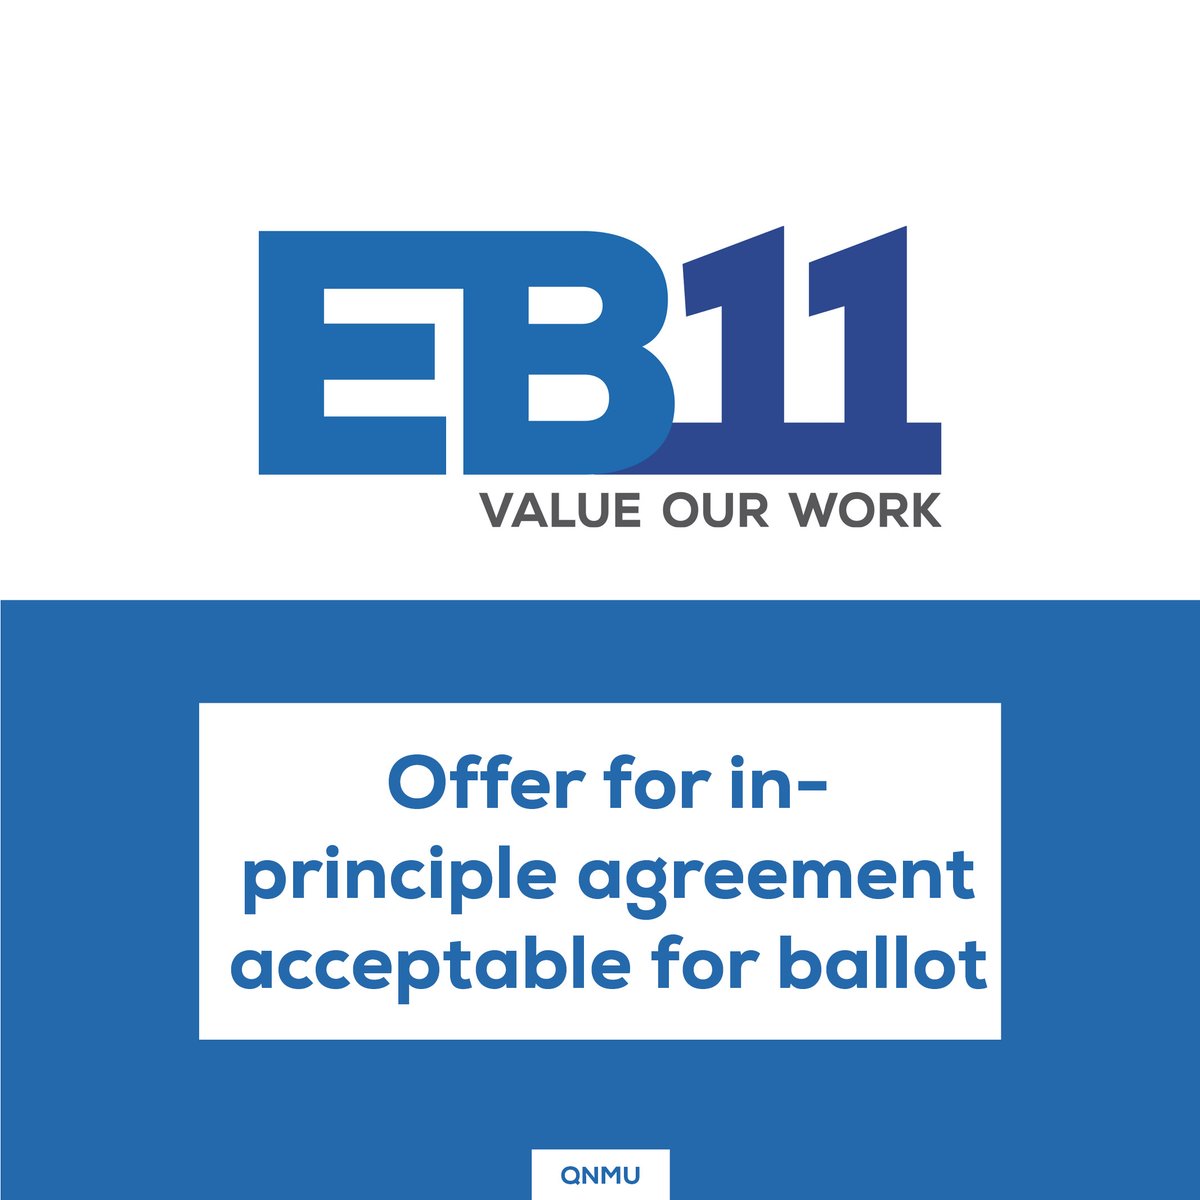 After extensive consultation with QNMU members, the QNMU has formally notified QLD Health that the offer for an in-principle agreement is acceptable to go to a ballot for #EB11. Read the latest update here: bit.ly/3A0Vj01 More info: qnmu.org.au/EB11.